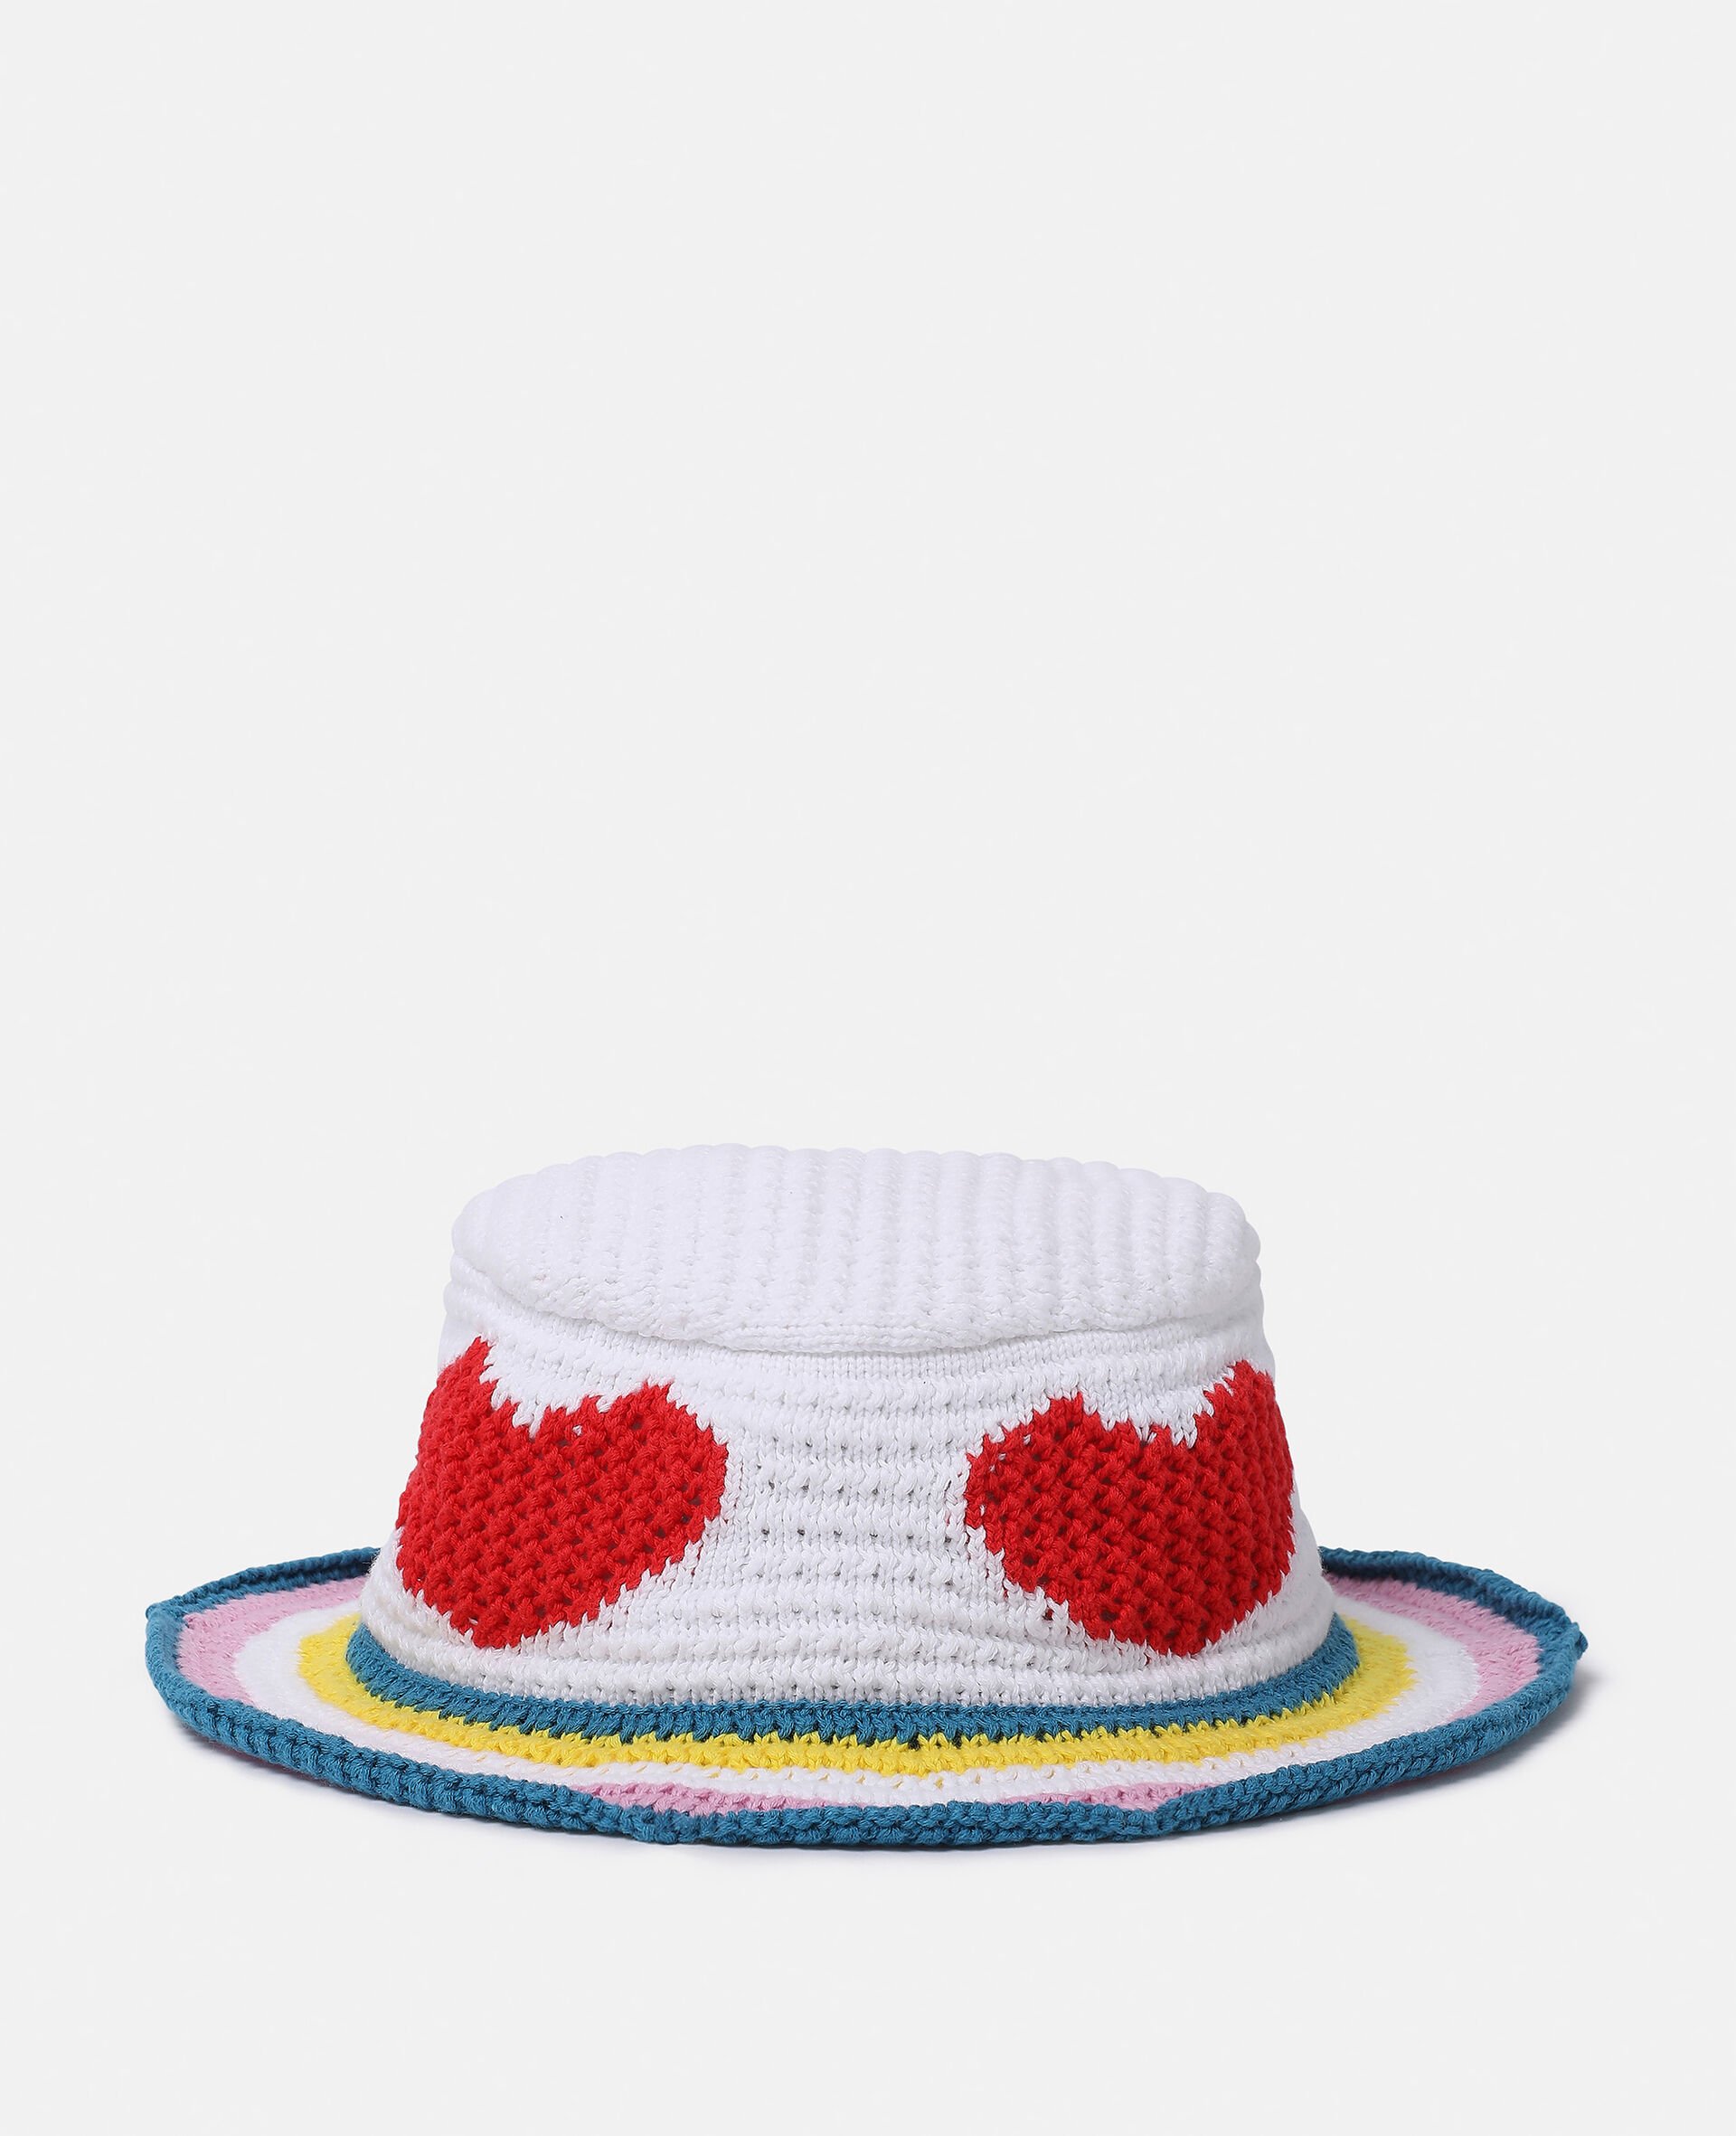 Heart Crocheted Bucket Hat-White-large image number 0